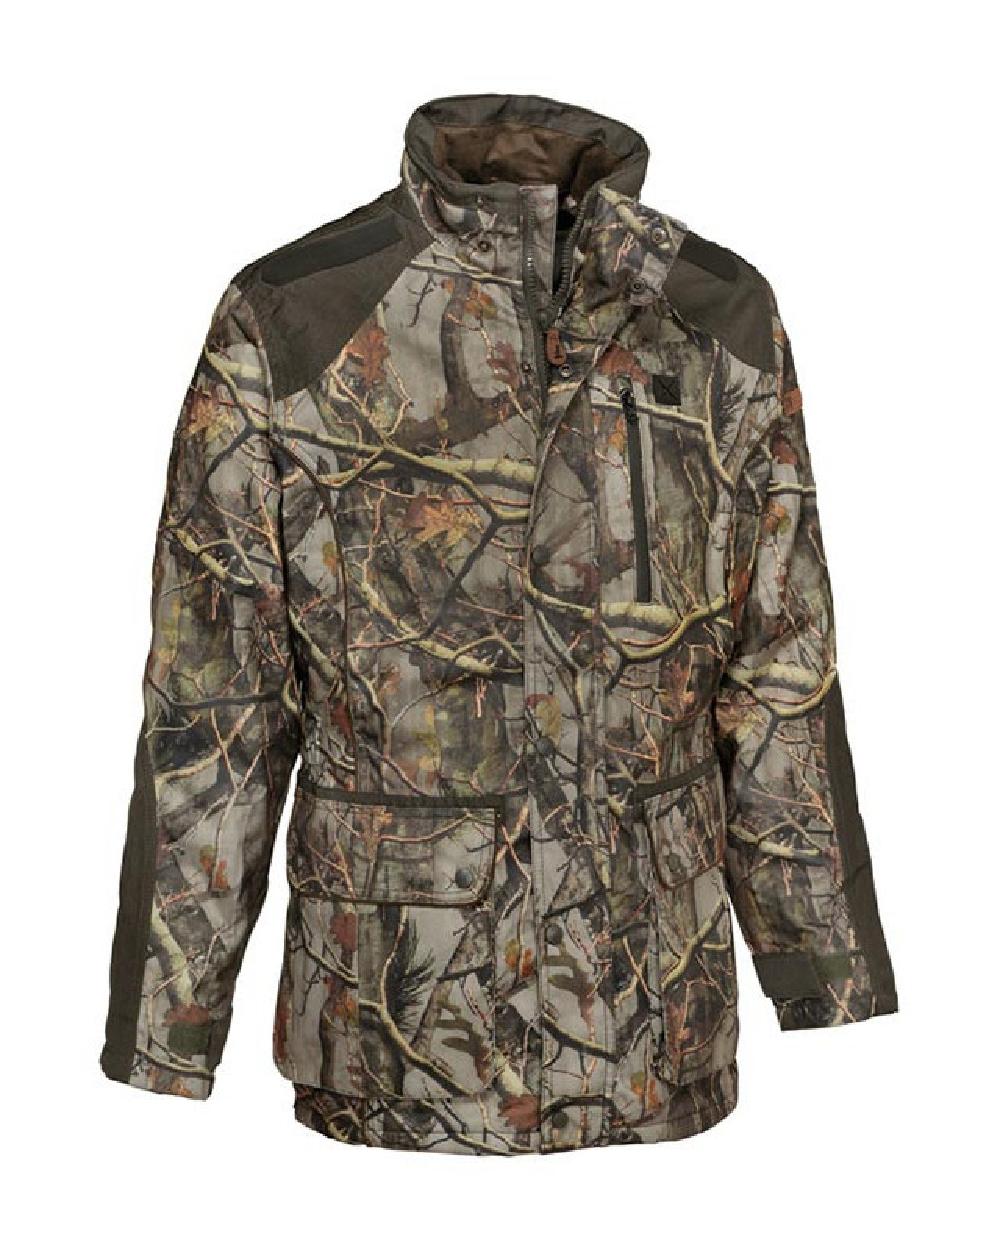 Percussion Brocard Ghostcamo Jacket in Forest Evo 